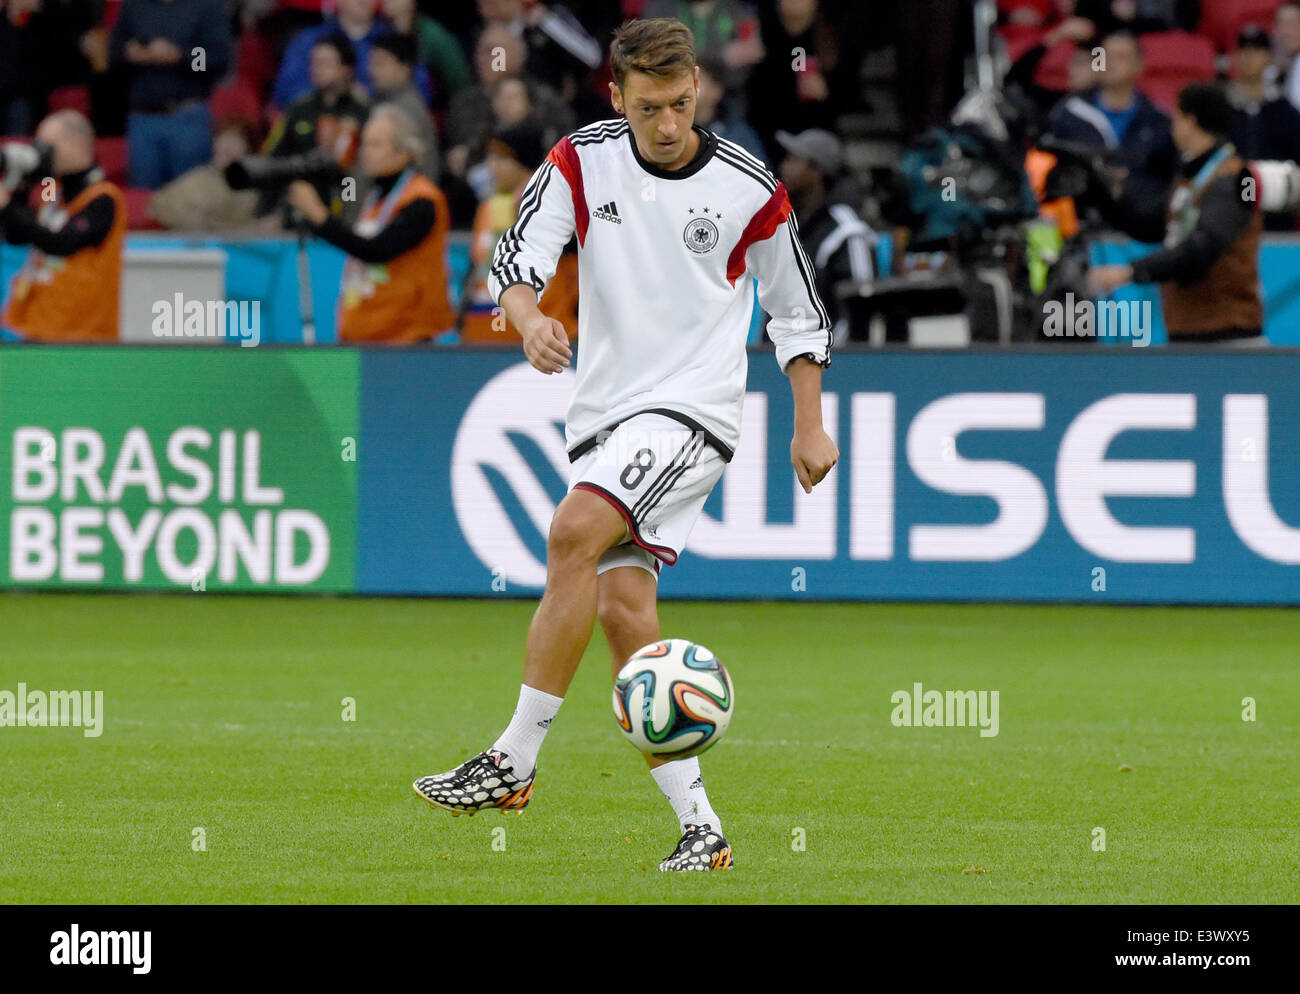 Porto Alegre, Brazil. 30th June, 2014. Germany's Mesut Oezil warms up prior to the FIFA World Cup 2014 round of 16 soccer match between Germany and Algeria at the Estadio Beira-Rio in Porto Alegre, Brazil, 30 June 2014. Credit:  dpa picture alliance/Alamy Live News Stock Photo